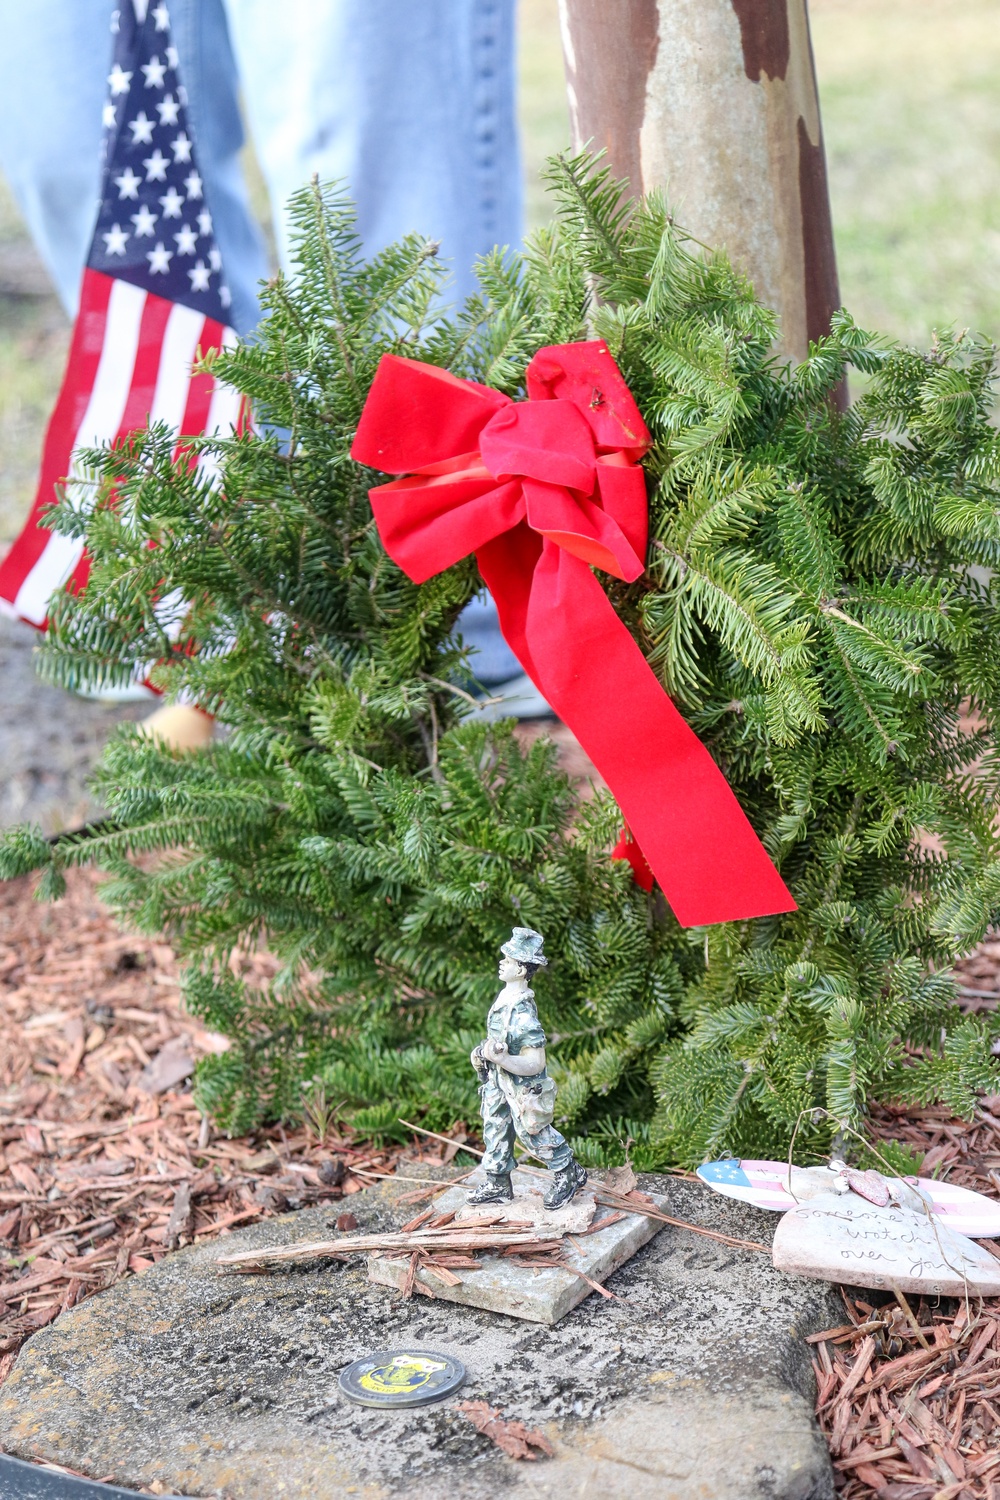 3rd Infantry Division hosts Wreaths for Warriors Walk